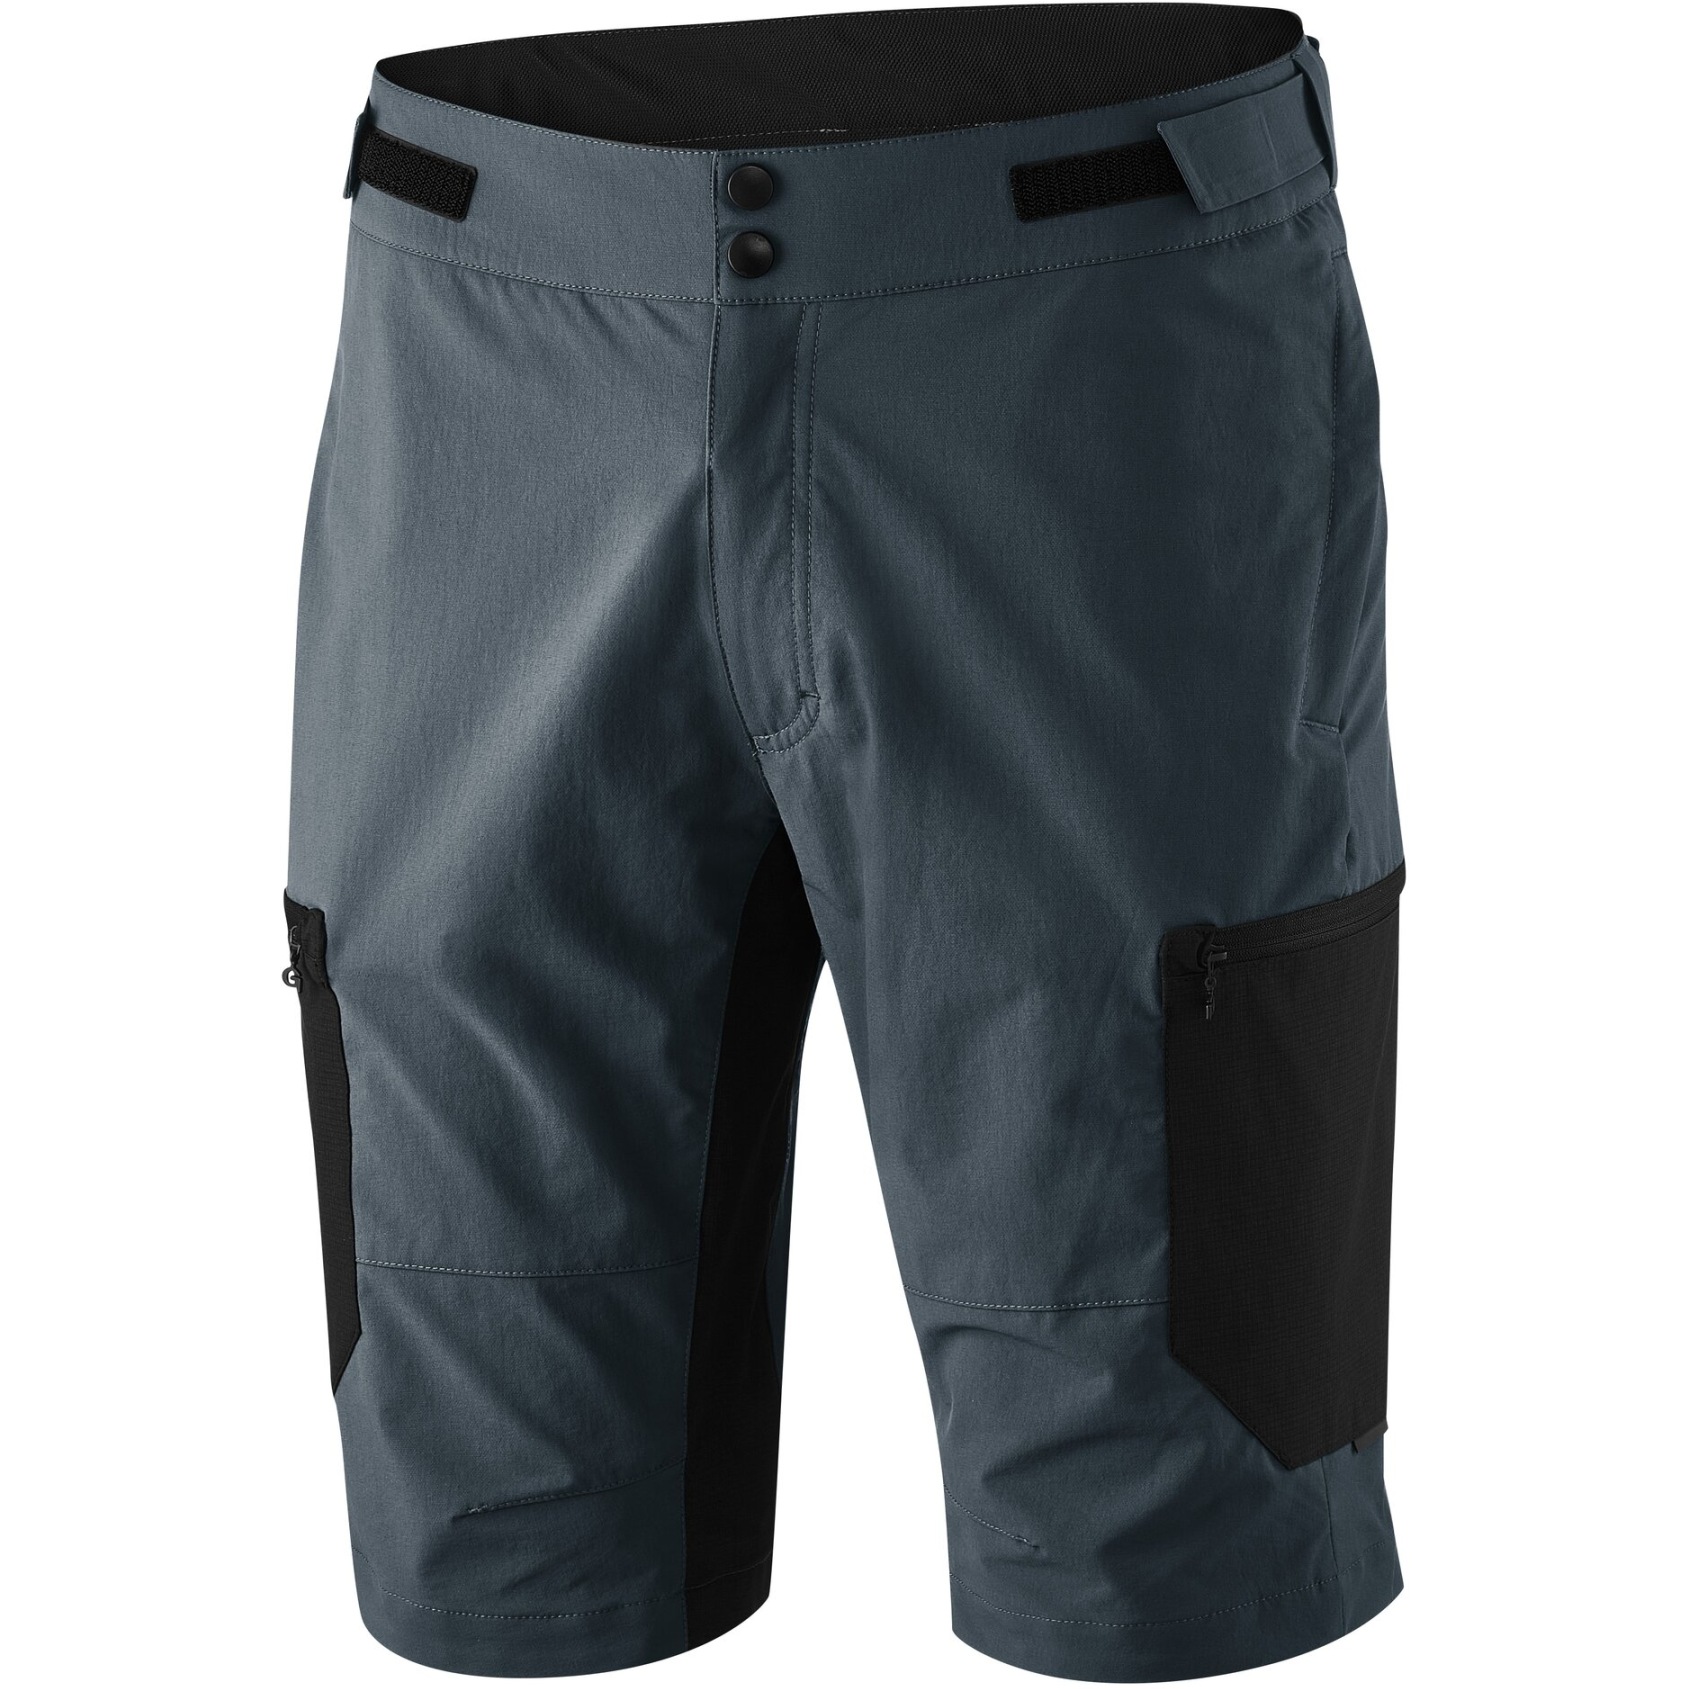 Picture of Gonso Garzone Bike Shorts Men - Graphite